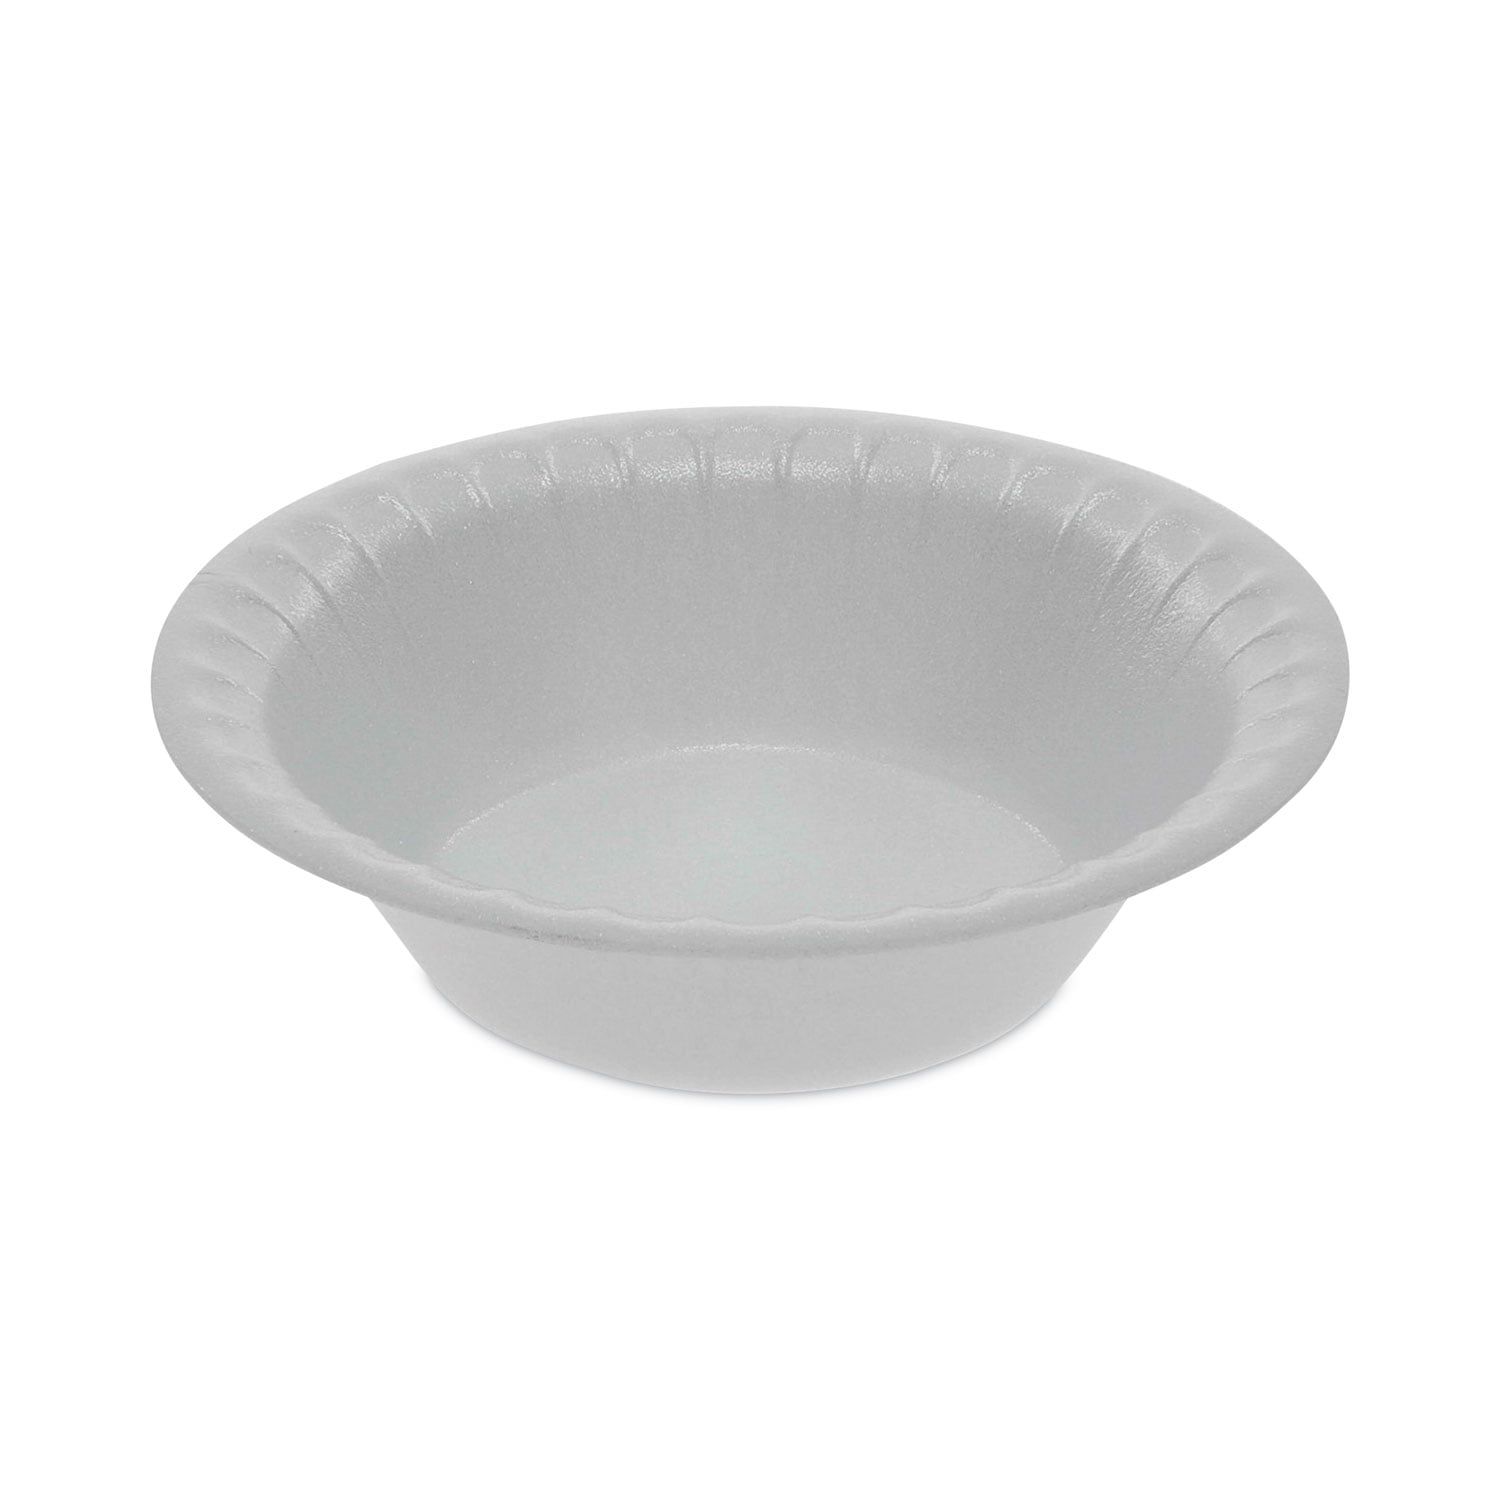 Pactiv Corporation Yth100040000 Satinware Bowl, Case Of 1250